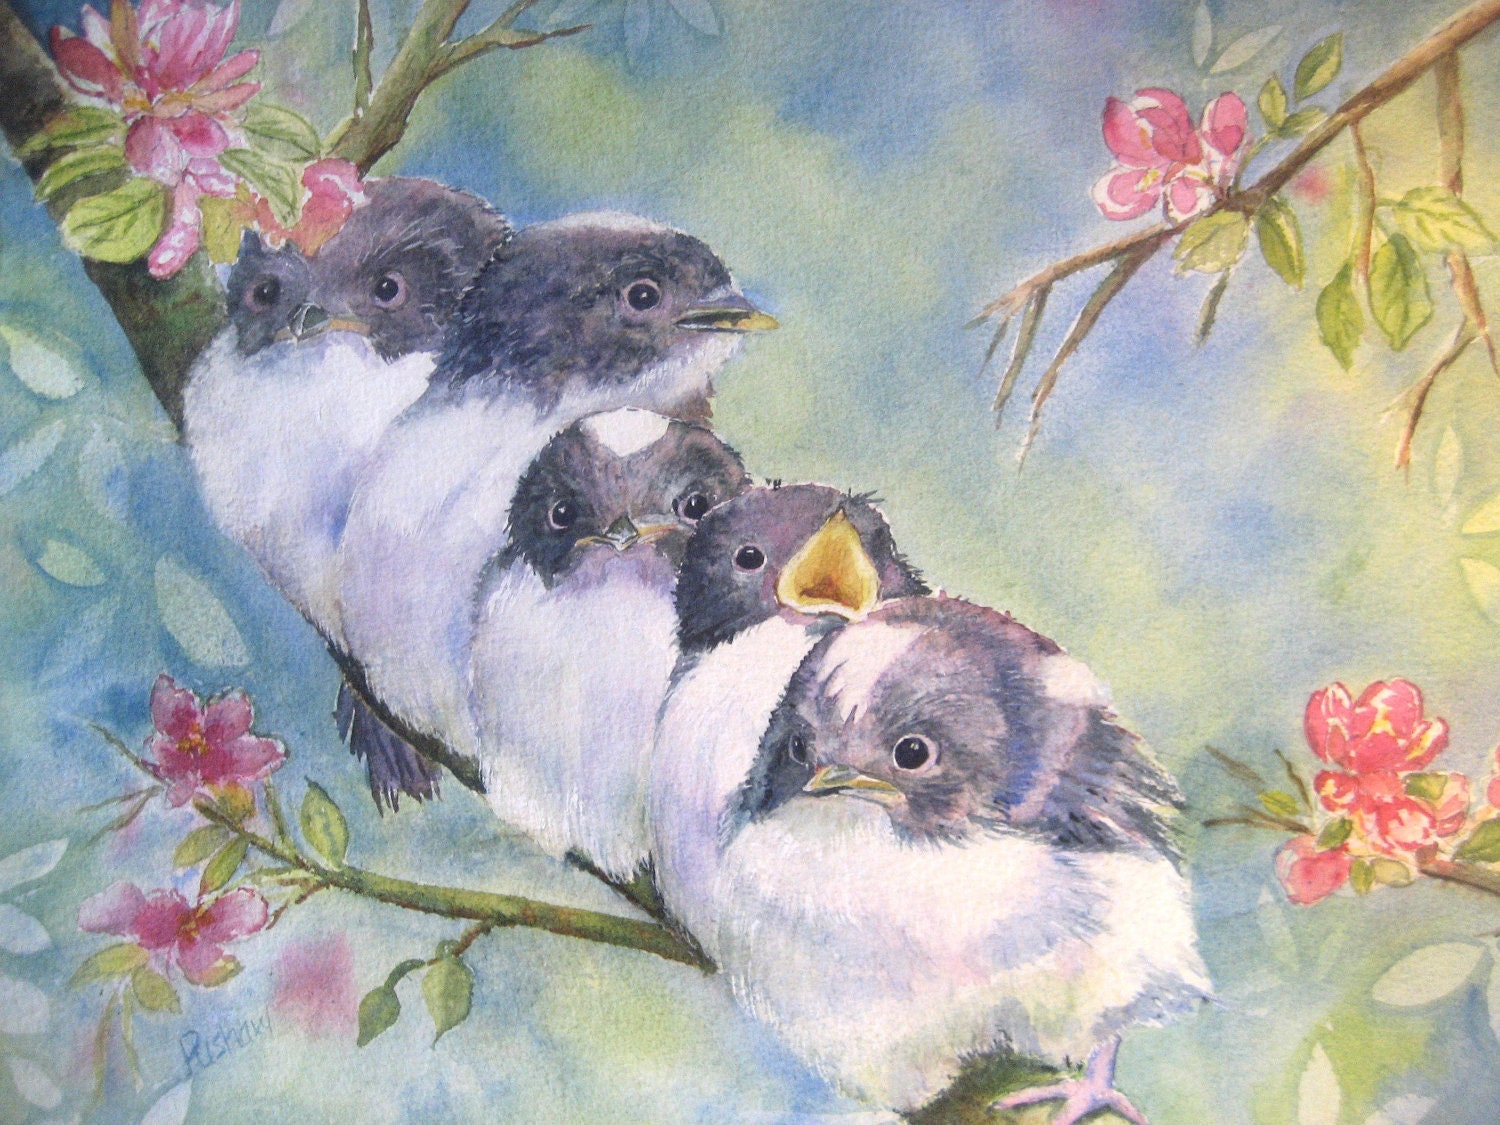 Original painting of baby birds getting ready to fly the coop.